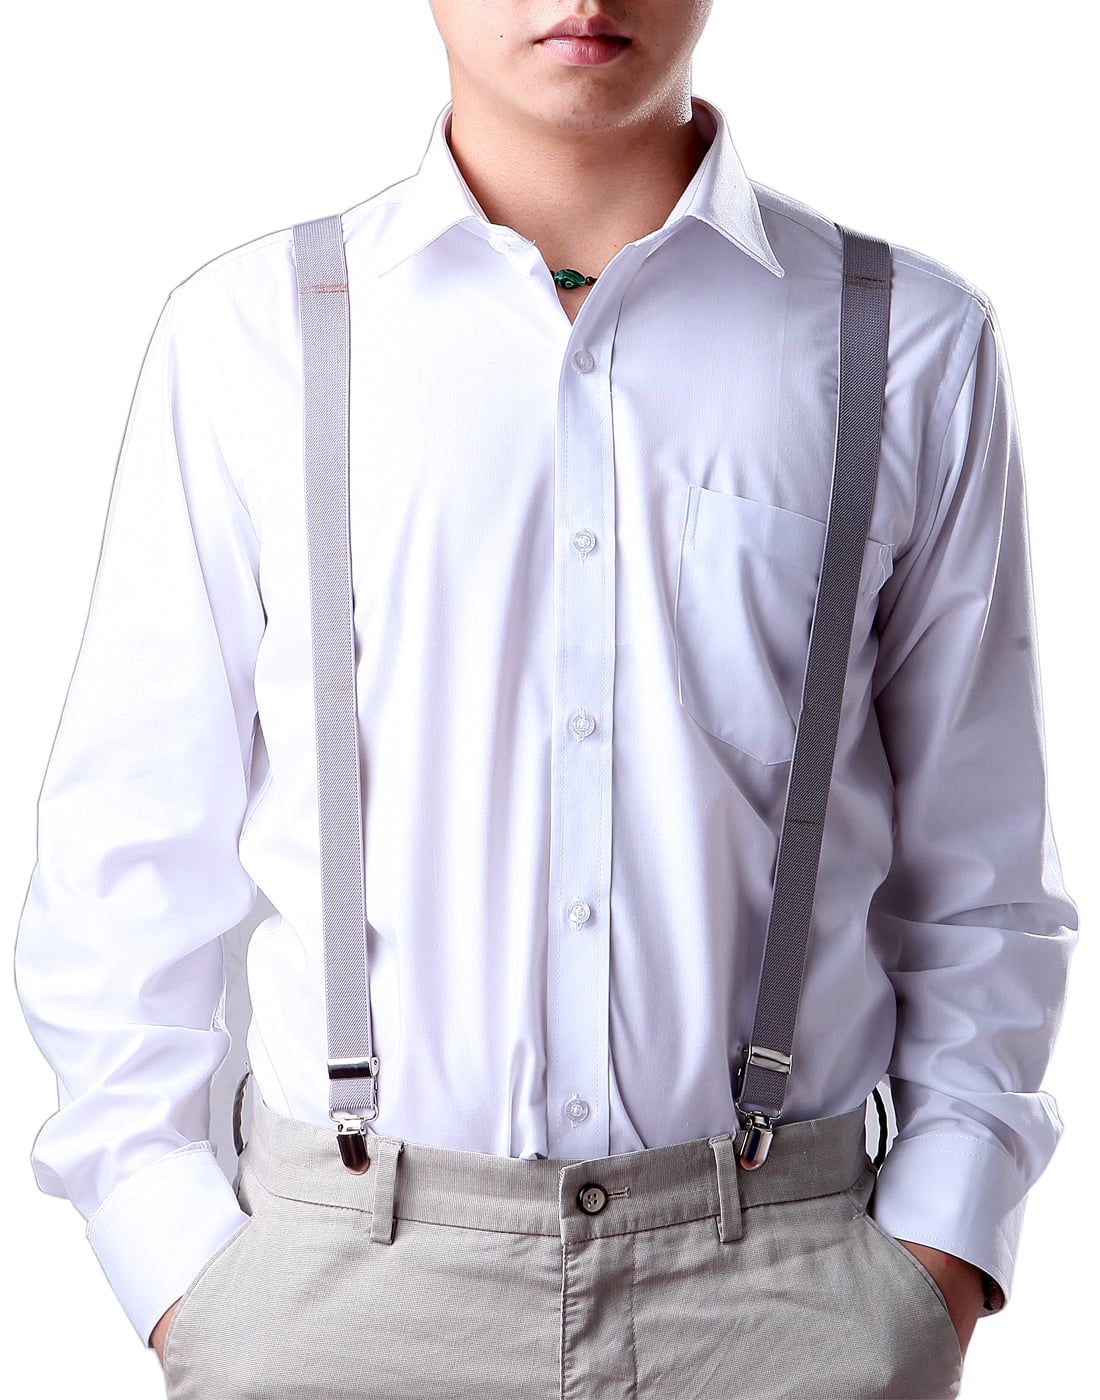 Leather Clip And Button Suspenders For Men Y-Back Style For Formal Outfits 